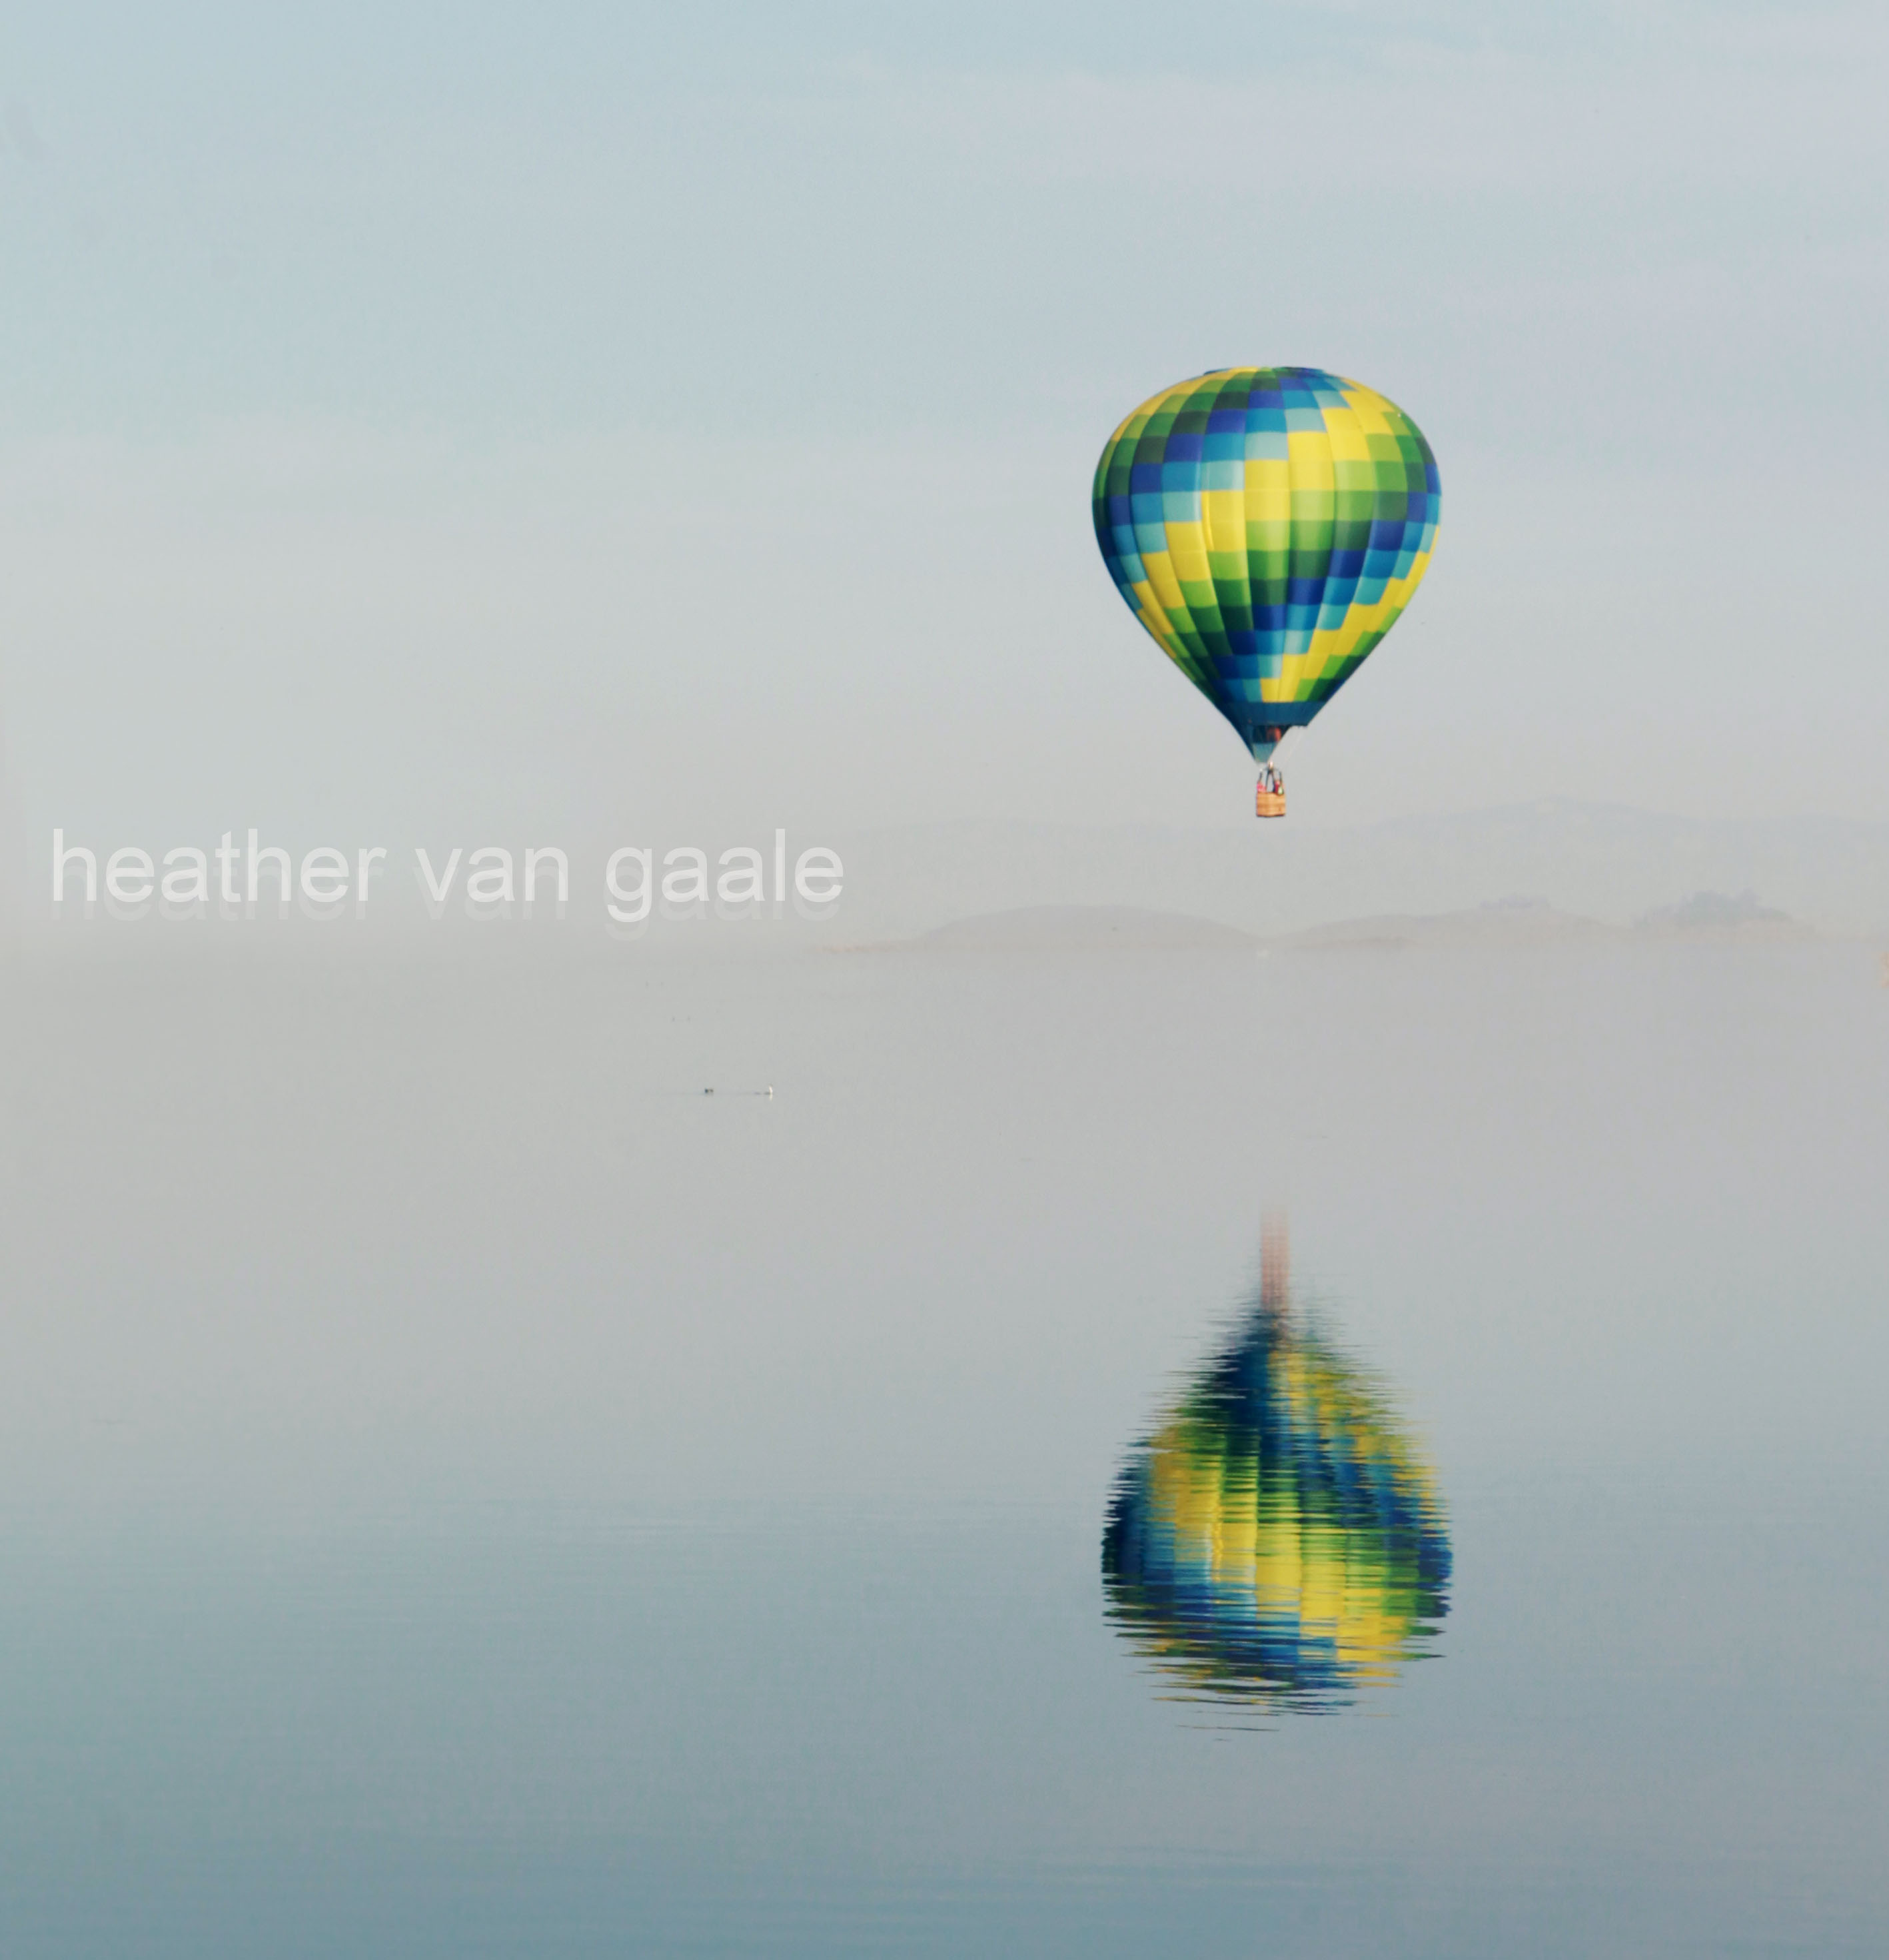 hot air balloon over lake skinner with reflection by heather van gale